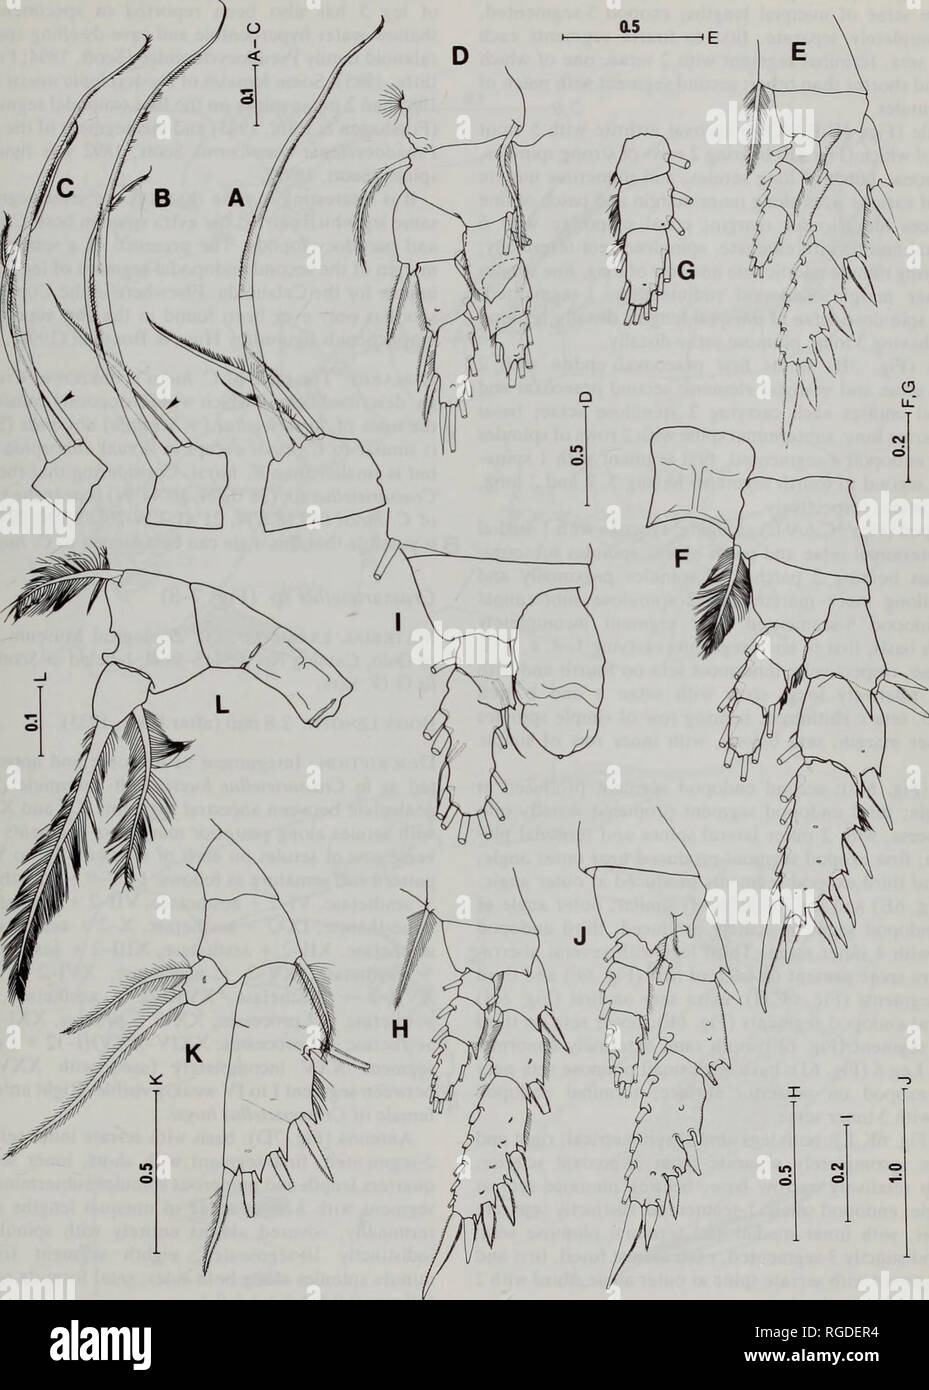 . Bulletin of the Natural History Museum Zoology. PHYLOGENY OF ARIETELLID COPEPODS 115. Fig. 6. Crassarietellus huysi gen. et sp. nov., female (holotype: A-C,J-L; paratypes: D-I). A, Second endopod segment of maxilliped; B, Third endopod segment of maxilliped, innermost seta indicated by arrowhead; C, Fourth endopod segment of maxilliped, innermost seta indicated by arrowhead; D, Leg 1, anterior surface; E, Leg 2, posterior surface; F, Aberrant leg 3, anterior surface; G, Right endopod of leg 3, anterior surface; H, Another aberrant leg 3, posterior surface; I, Extremely aberrant leg 3, anteri Stock Photo